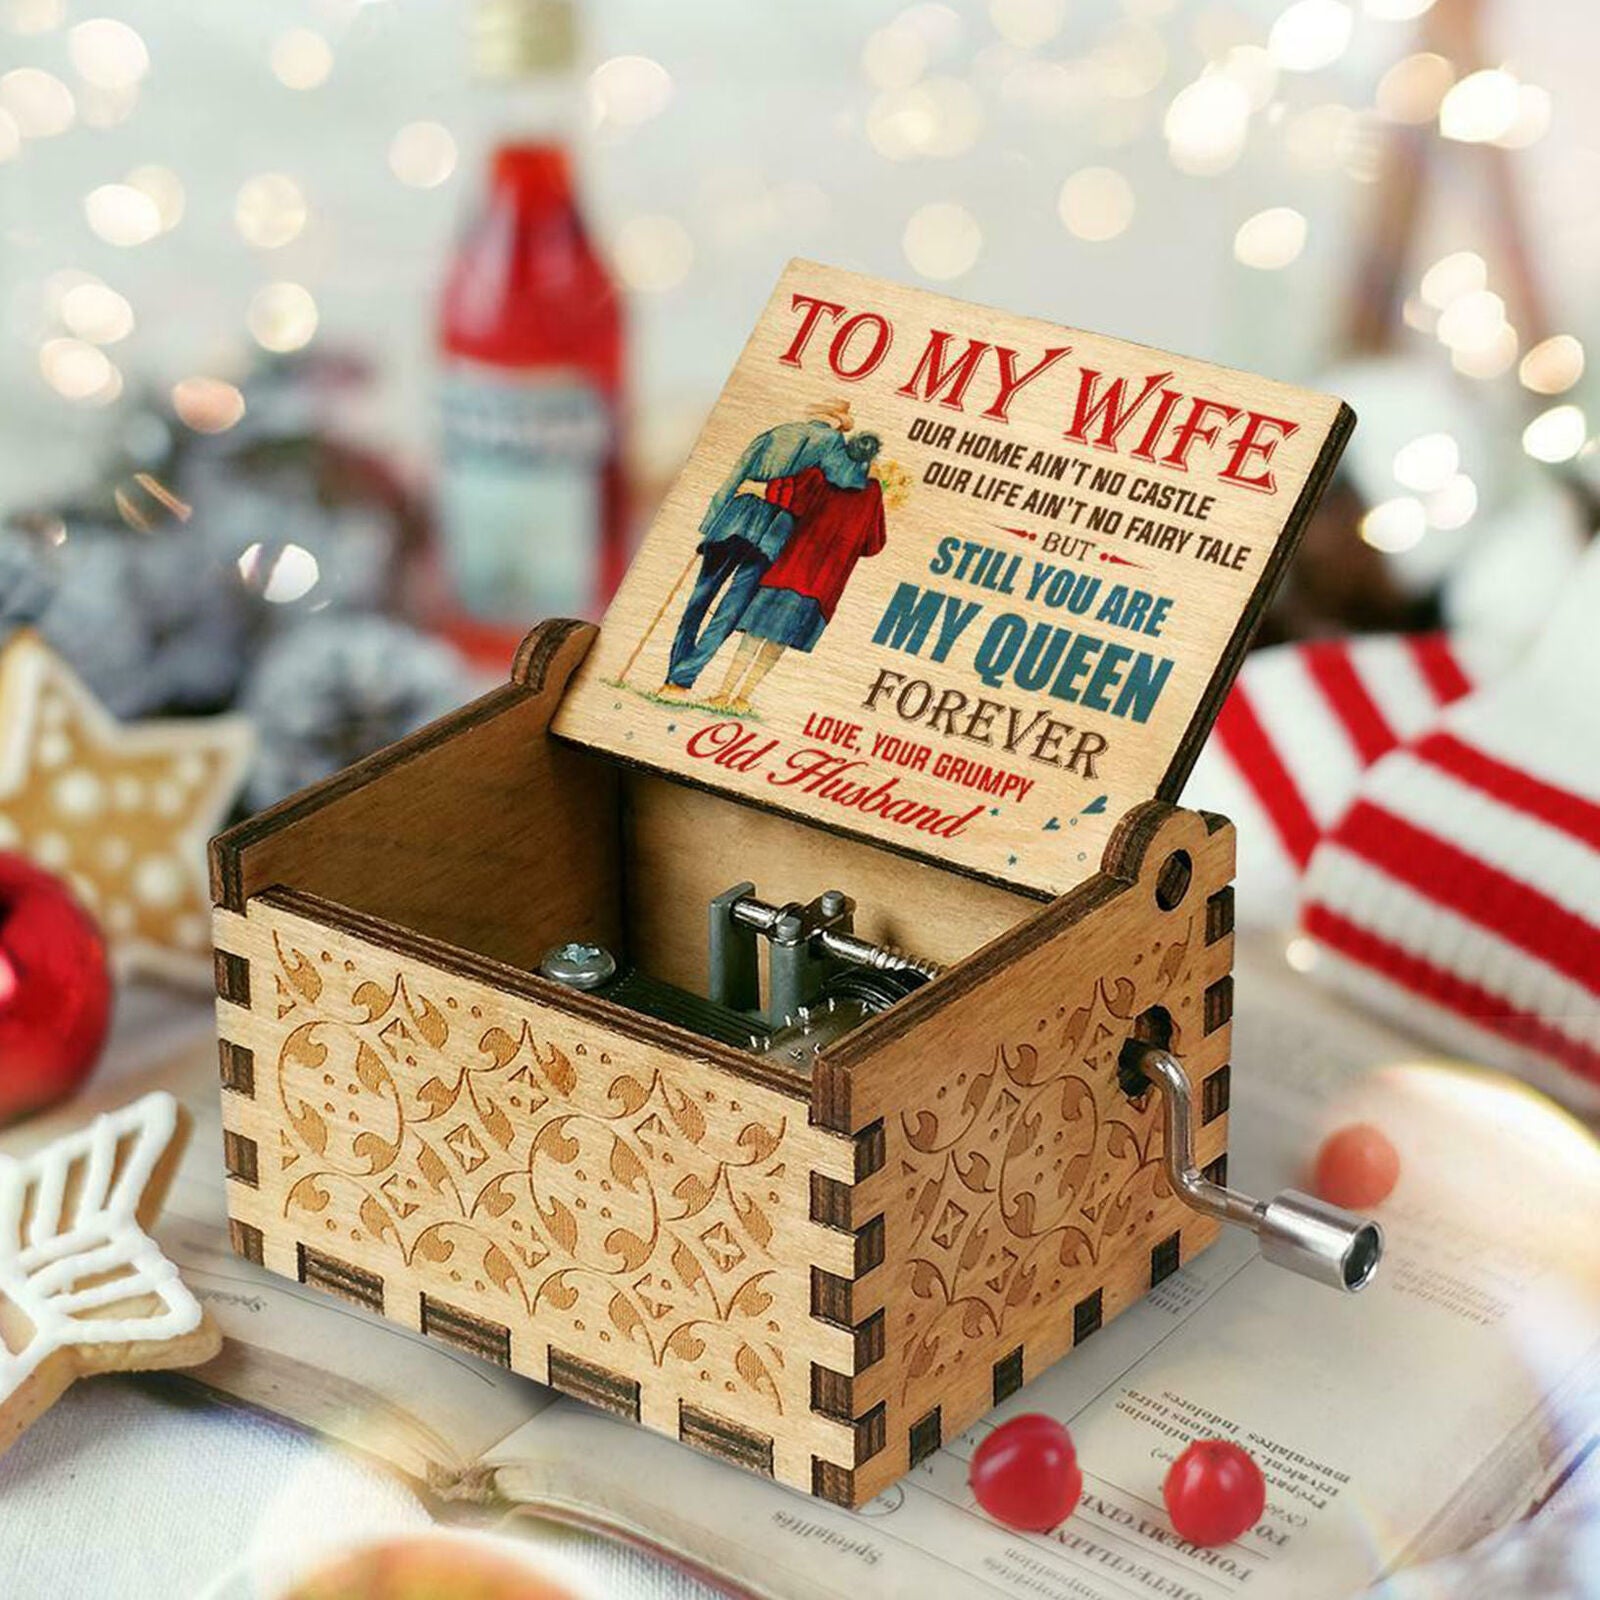 Husband To Wife - You Are My Queen Forever - Colorful Music Box